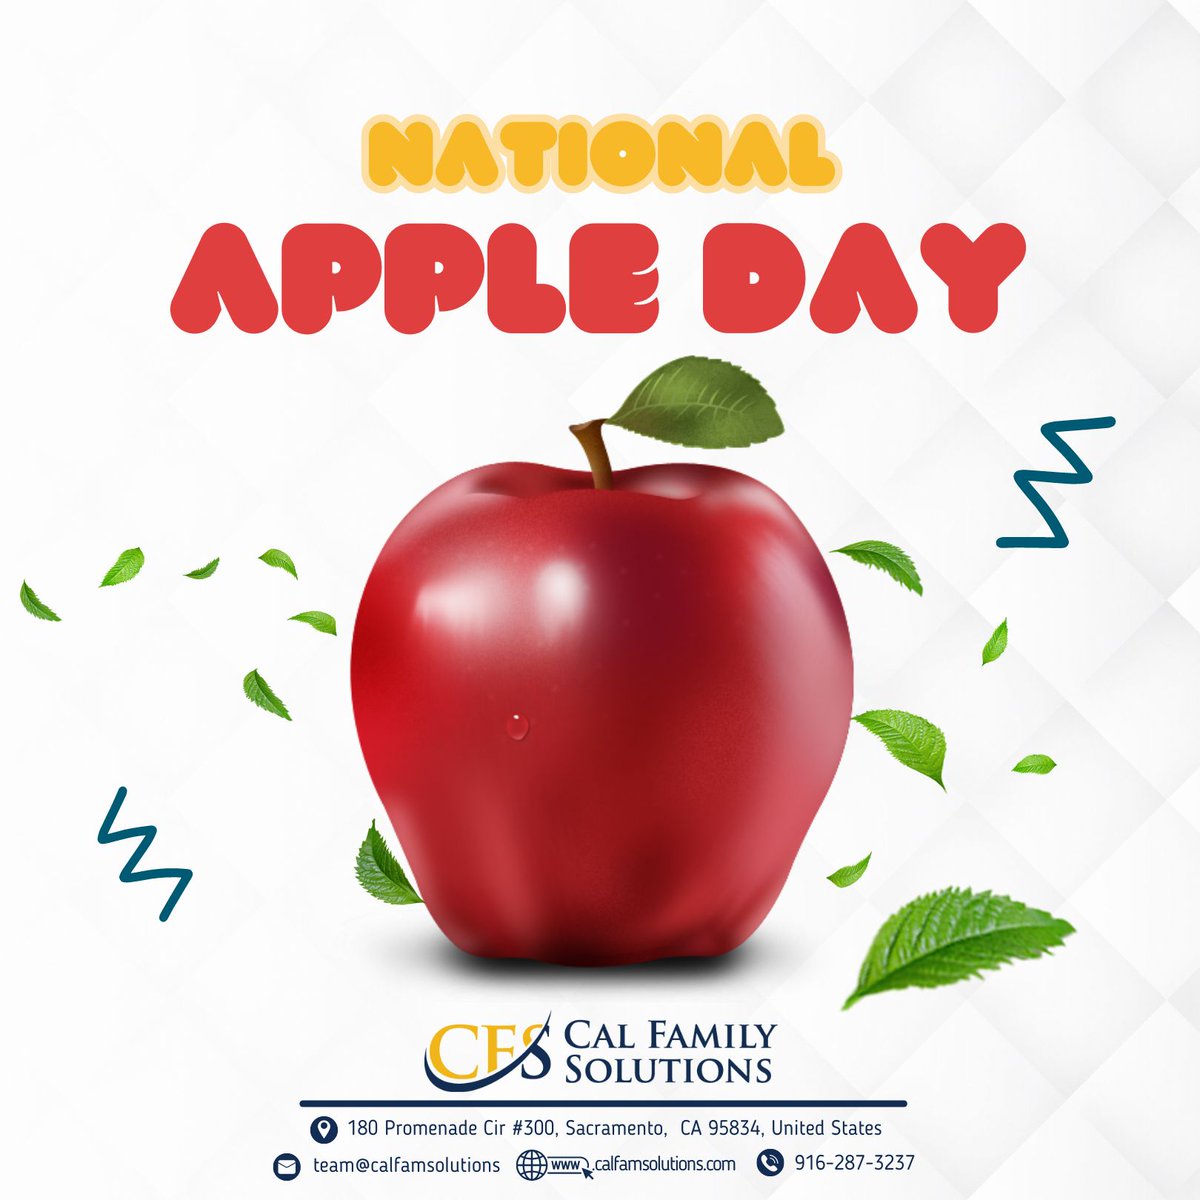 From orchard to table, let's savor the timeless delight of apples on this special day. 🍏🍎🌳
#AppleLovers #AutumnDelights #AppleObsession #AppleRecipes #FallFlavors #HealthyEating #SeasonalTreats #DivorceProcess #DivorceHelpCA #DivorceConsultation #DivorceAttorneyCA